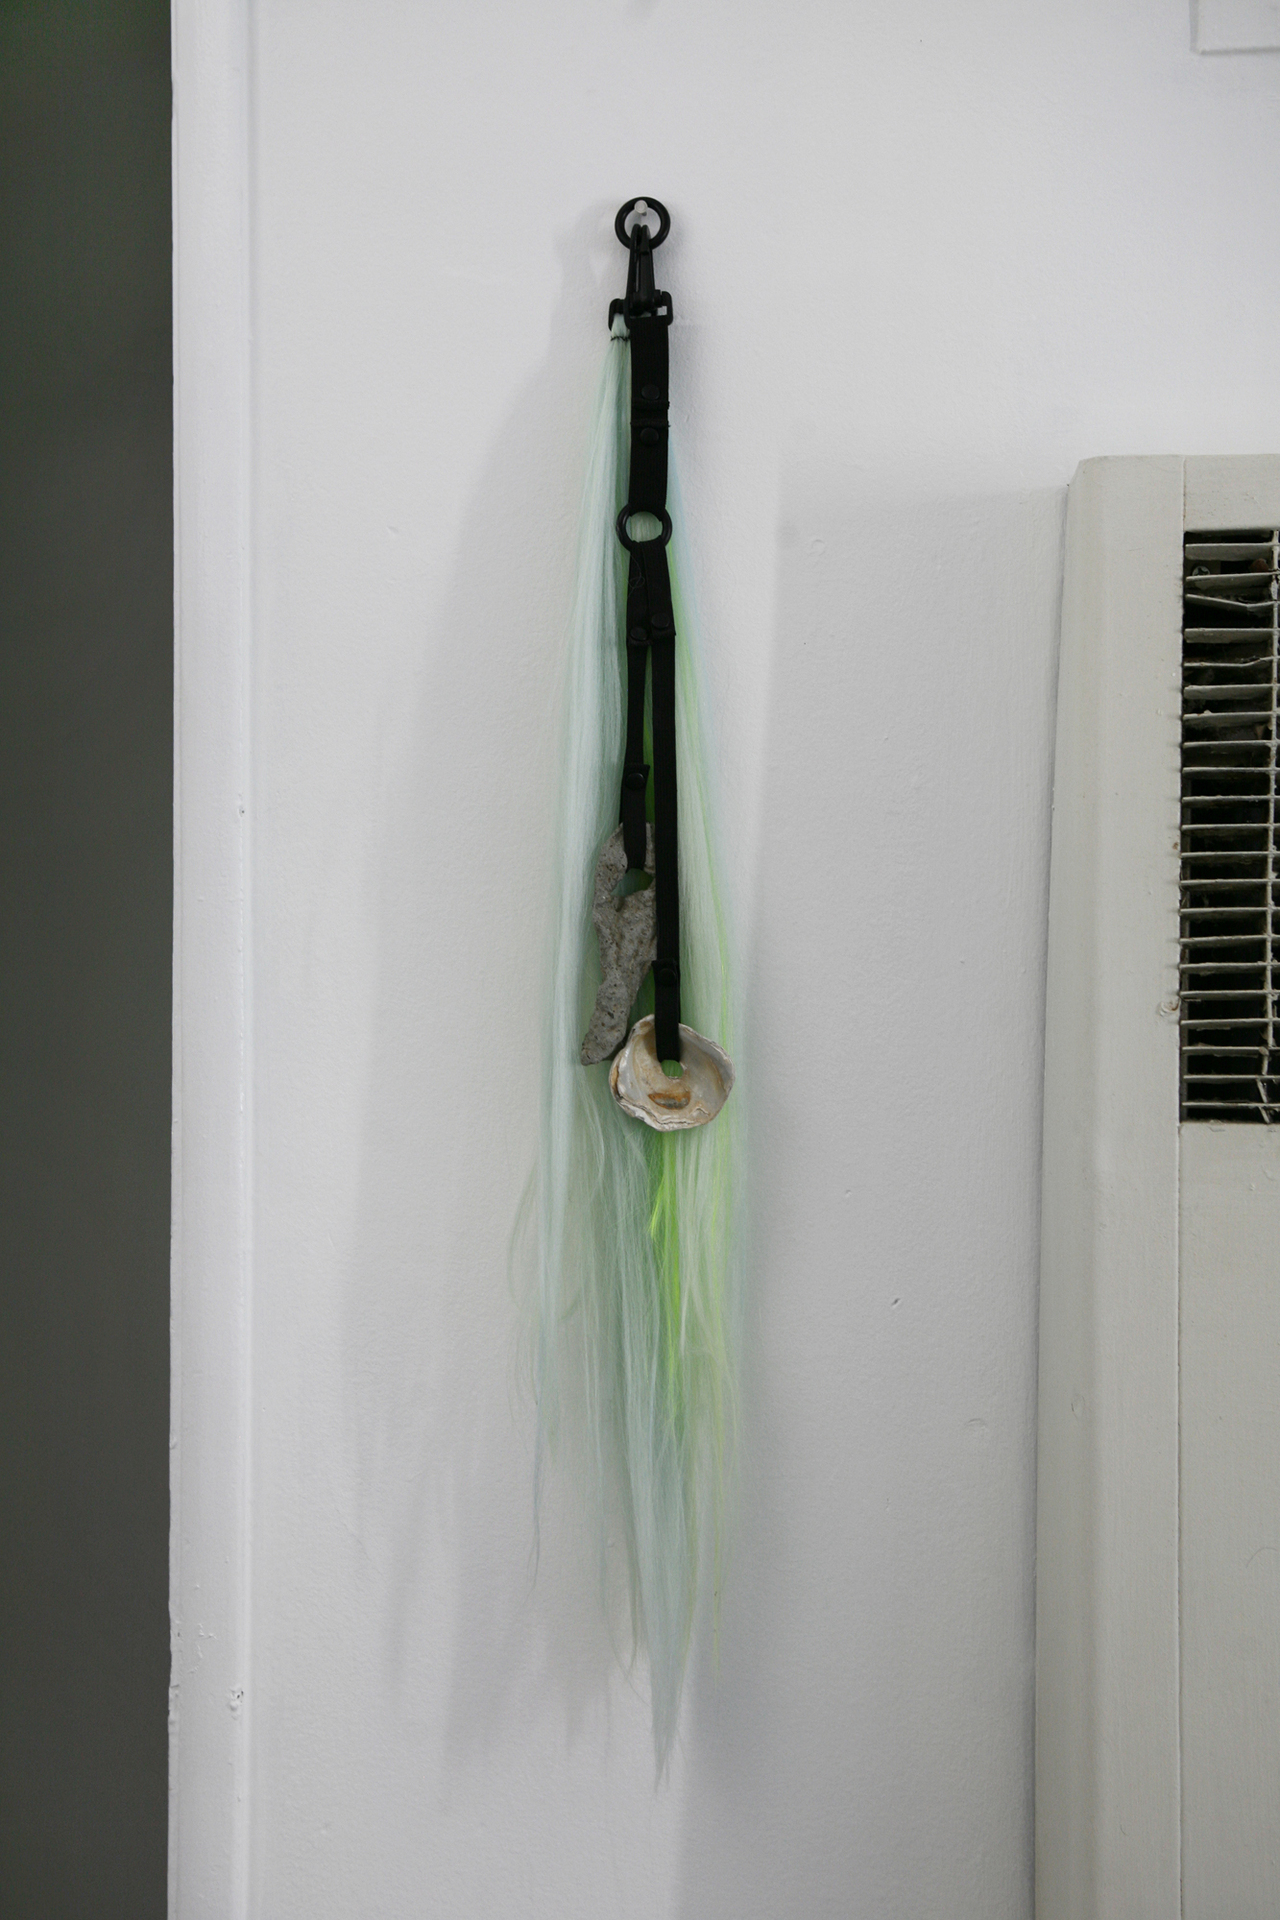 Rachel McRae, Ongoing reconfiguration of elements using a customizable system of elastic straps, athletic snaps and clips II, 2021, oyster shells mud-larked from the Thames with fidget spinners, hag-stones, and fluorescent hair-extensions, dimensions variable